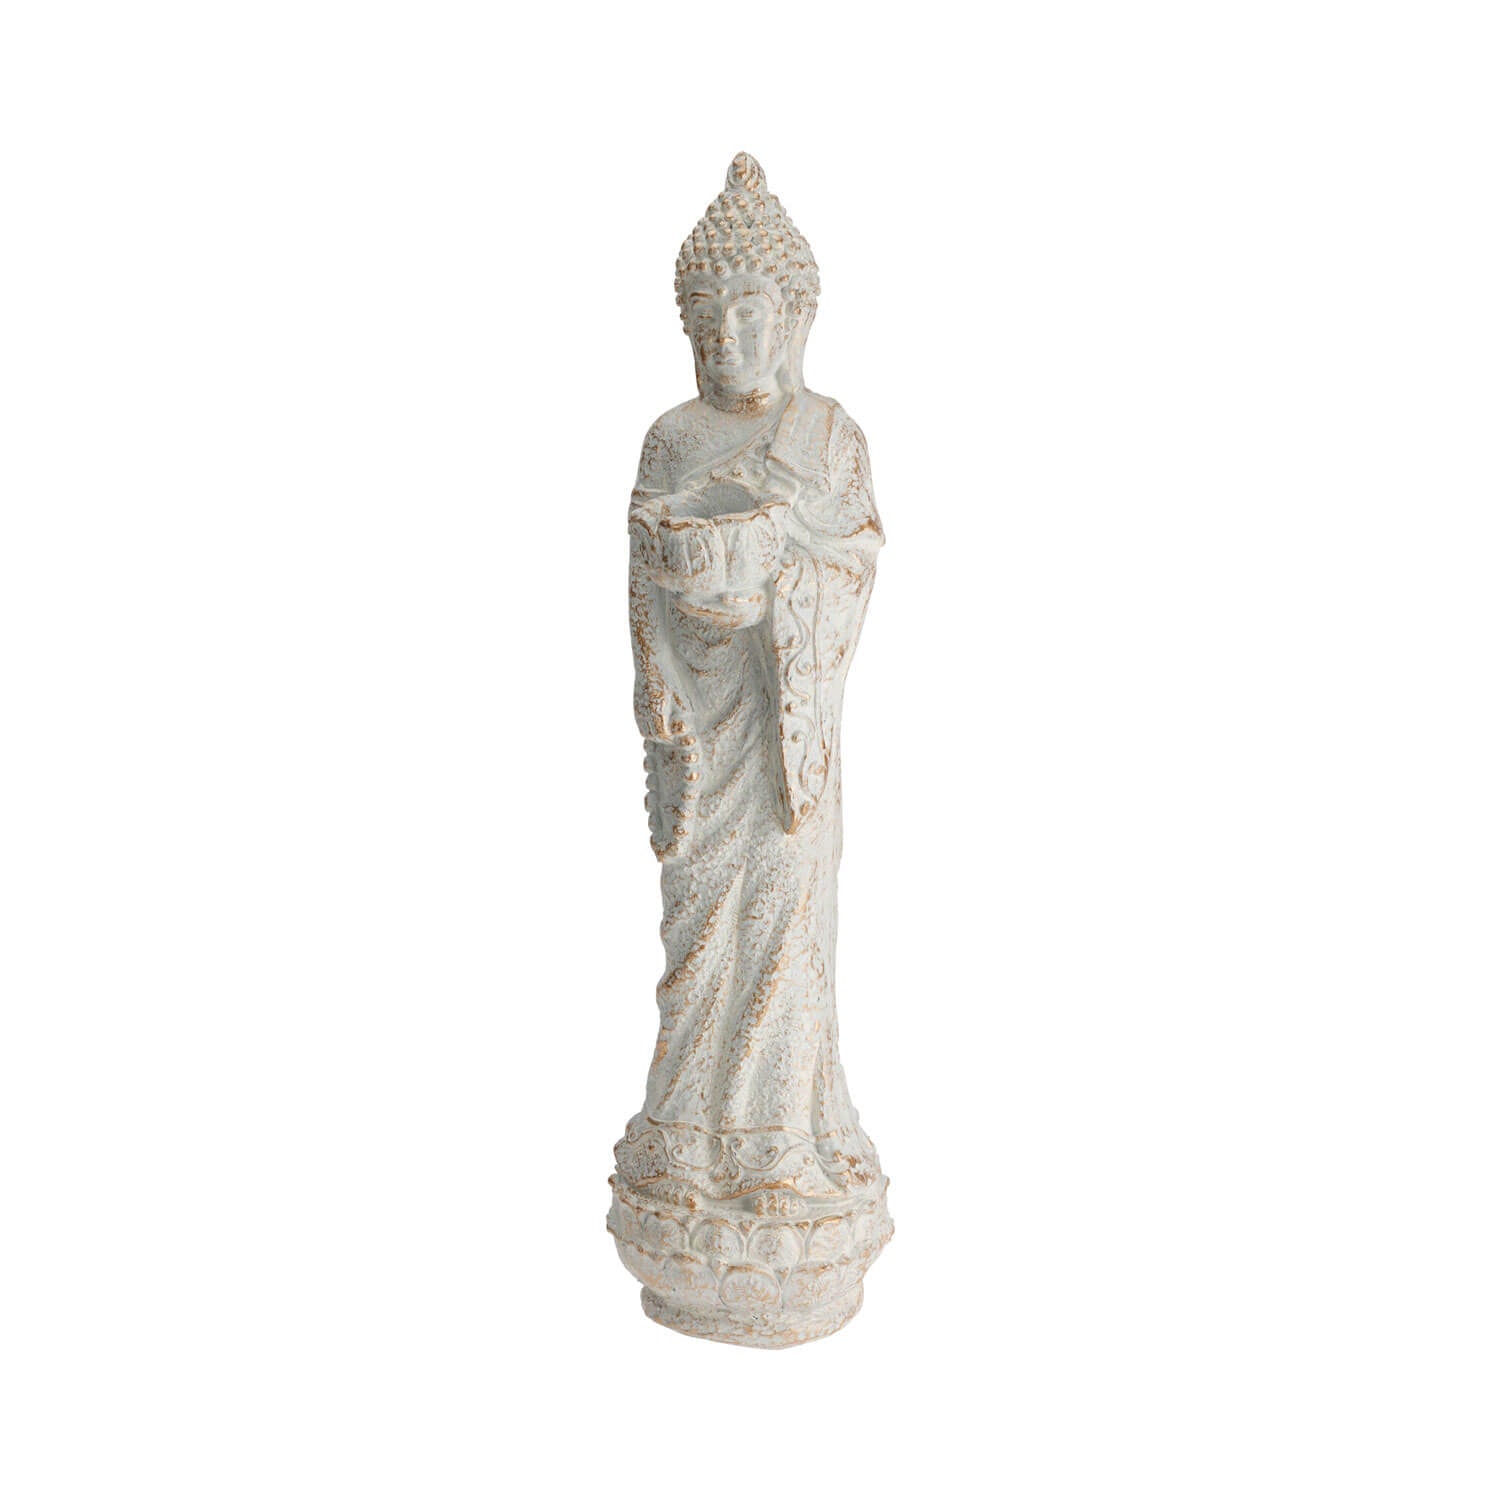 The Home Collection Buddah Statue 1 Shaws Department Stores